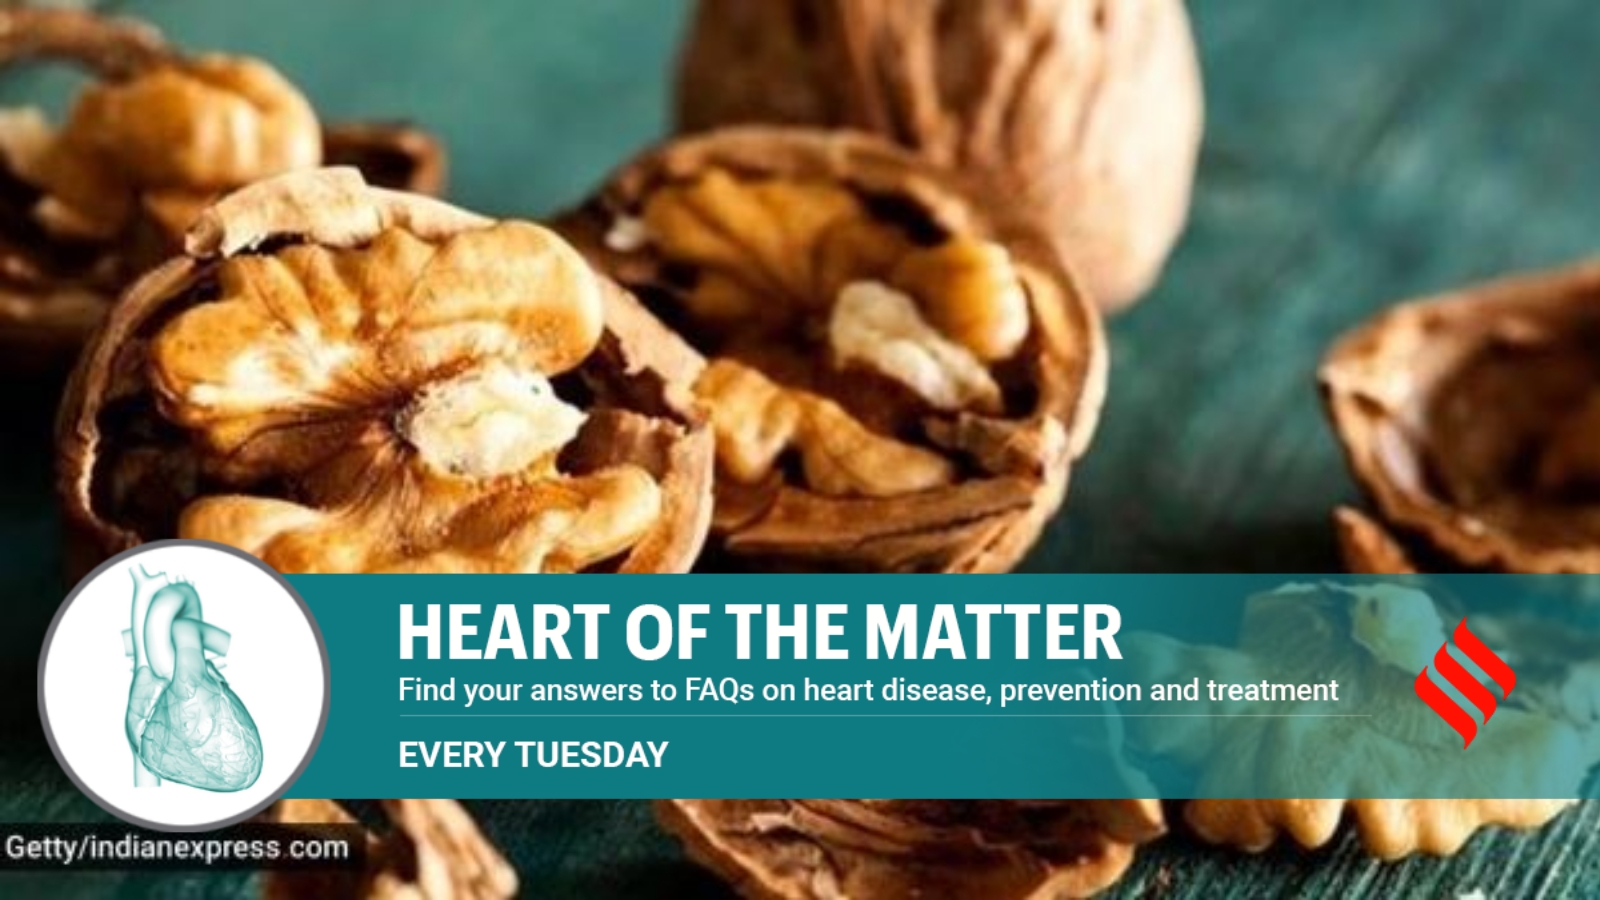 Can walnuts in place of eggs or sausage for breakfast be good for your heart? Three experts explain latest study | Health and Wellness News